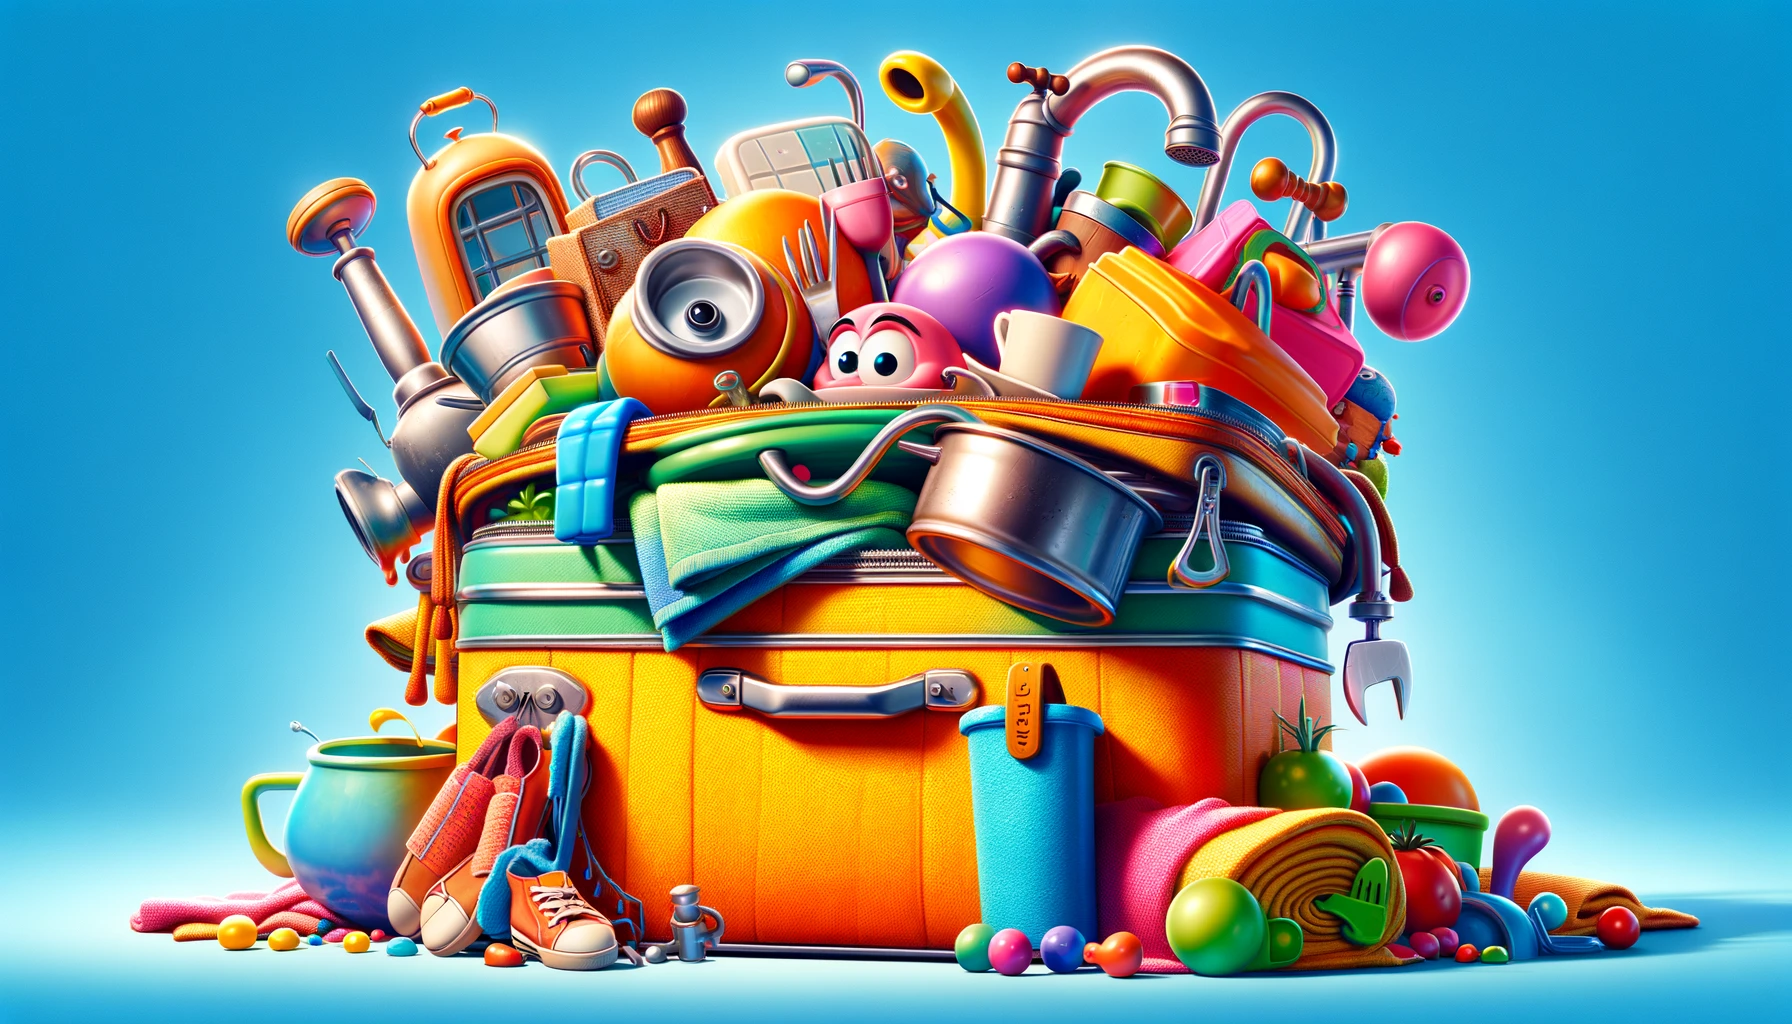 A colorful Pixar-style image of an overflowing suitcase packed with everything but the kitchen sink, including the sink itself, showcasing a whimsical adventure.